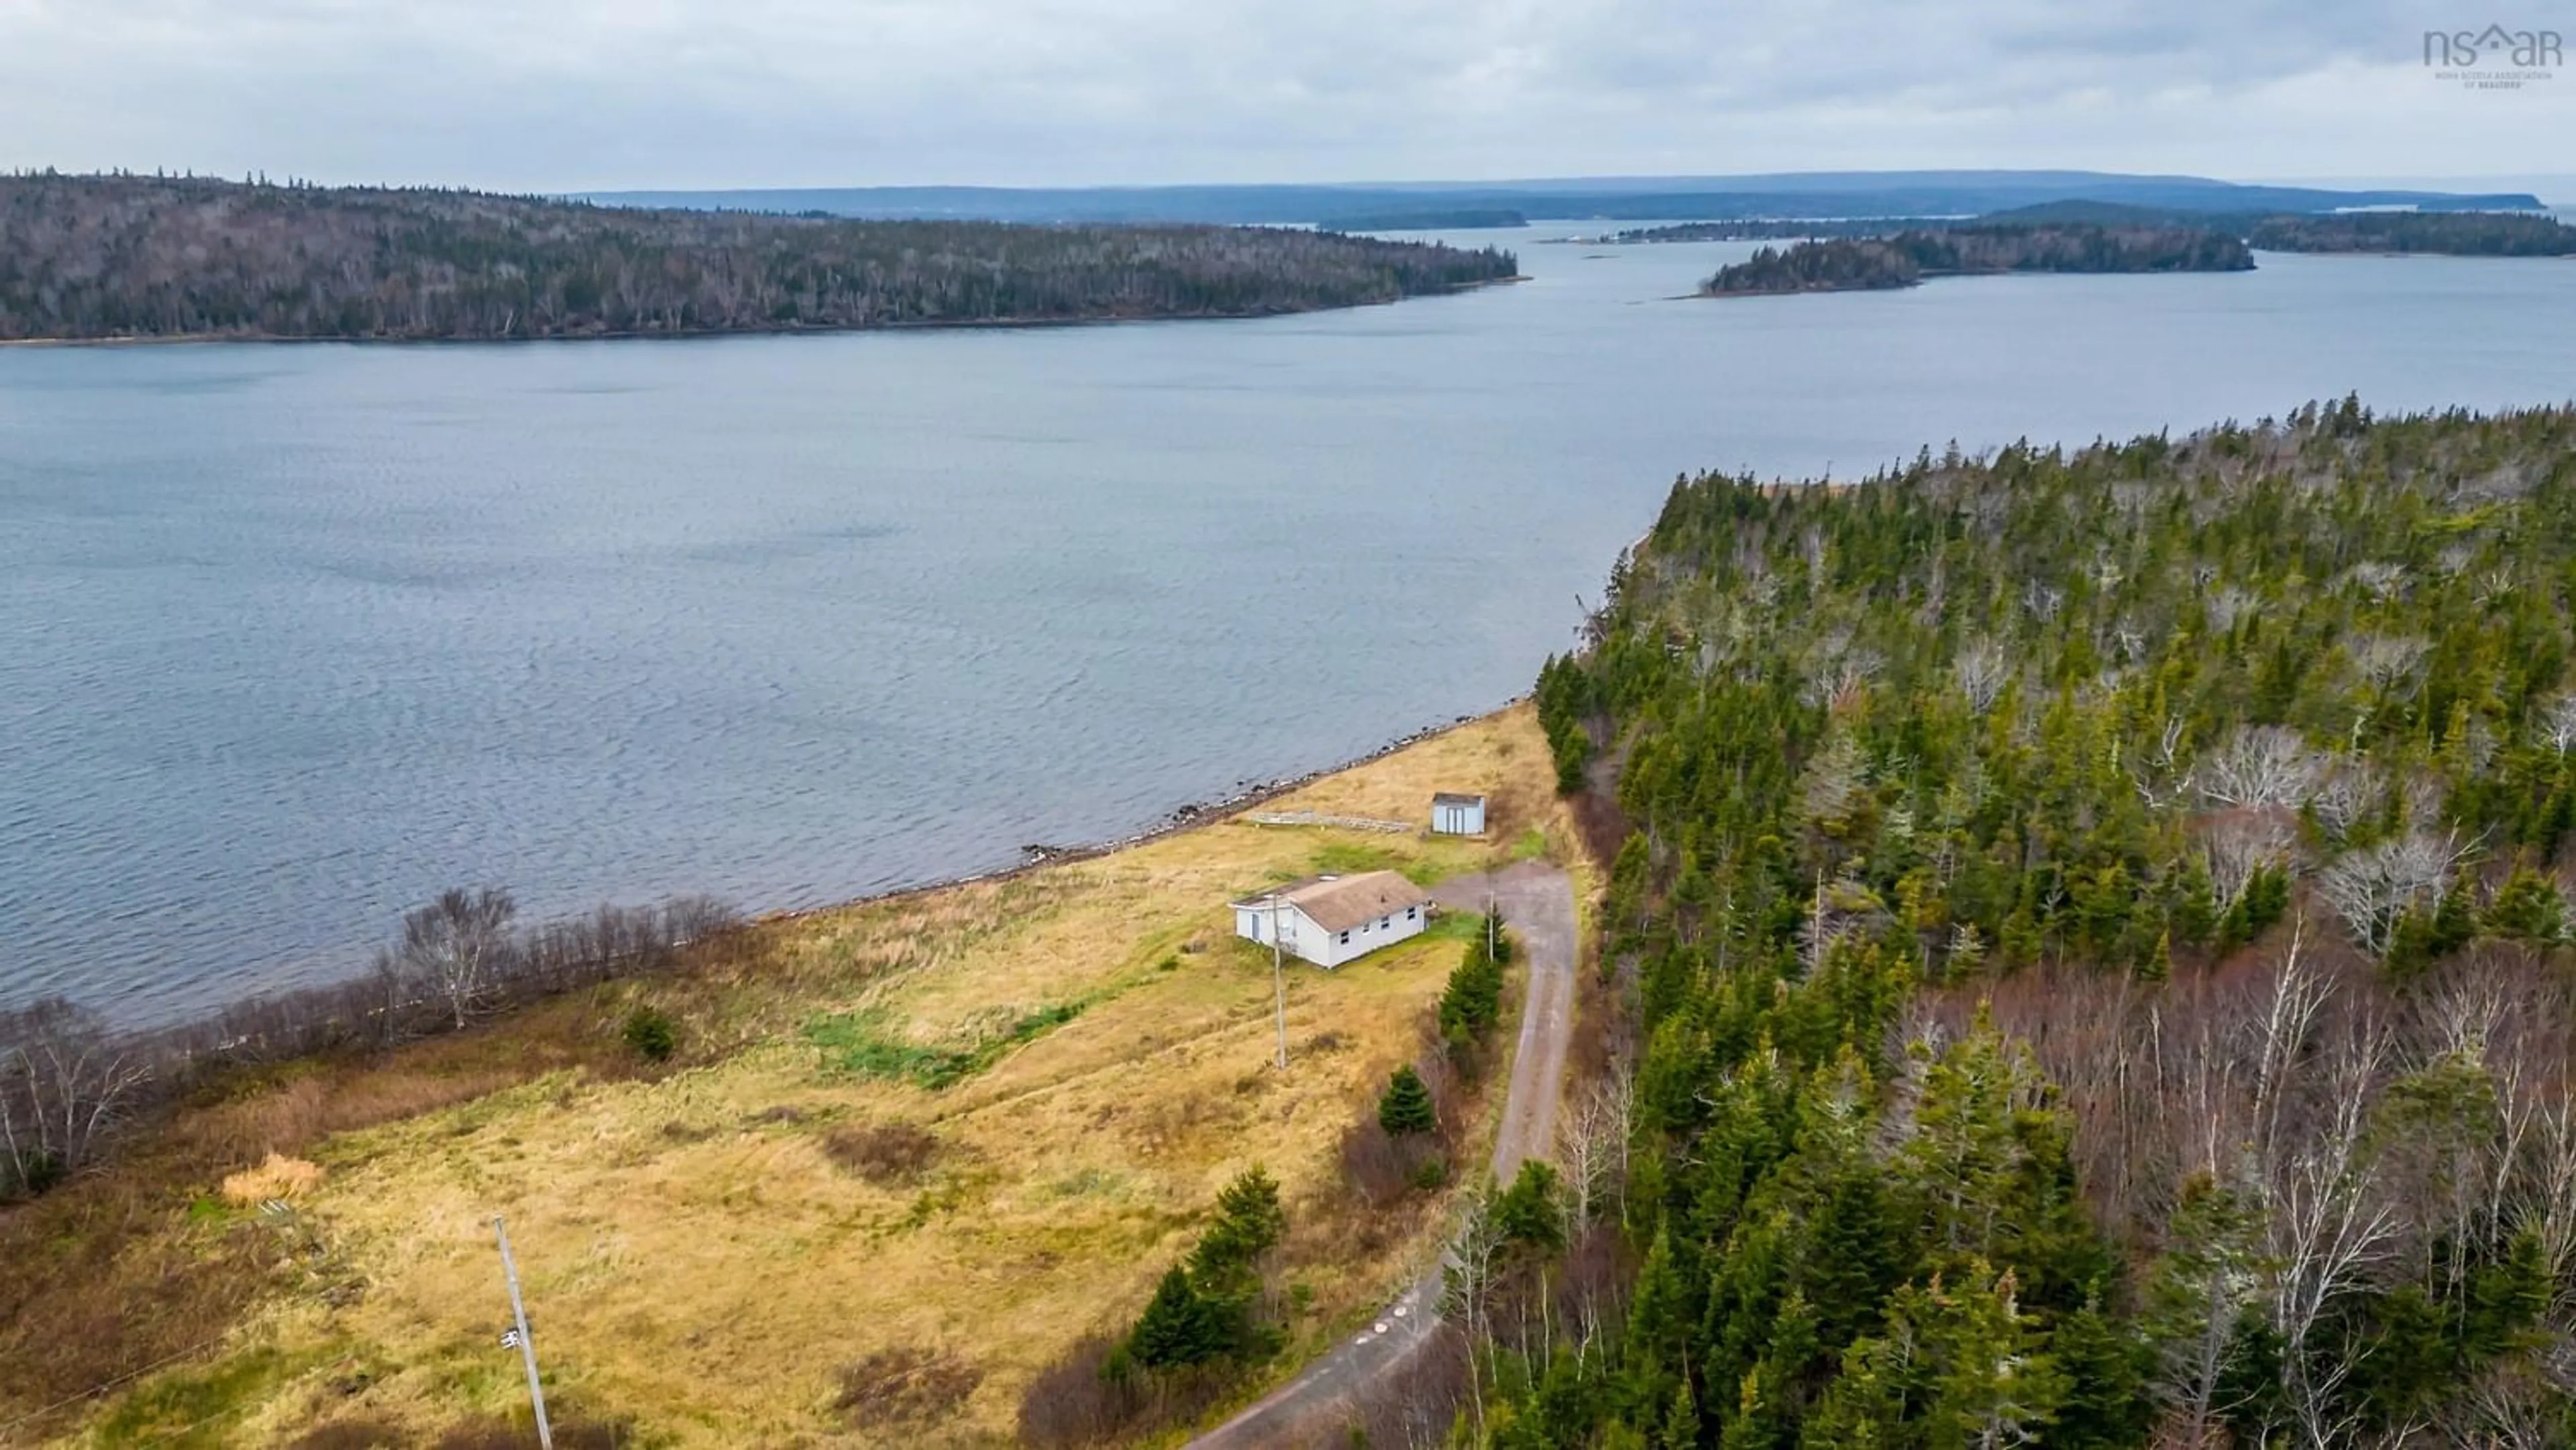 Lakeview for 12795 Highway 4 Hwy, Soldiers Cove Nova Scotia B1J 1Z5